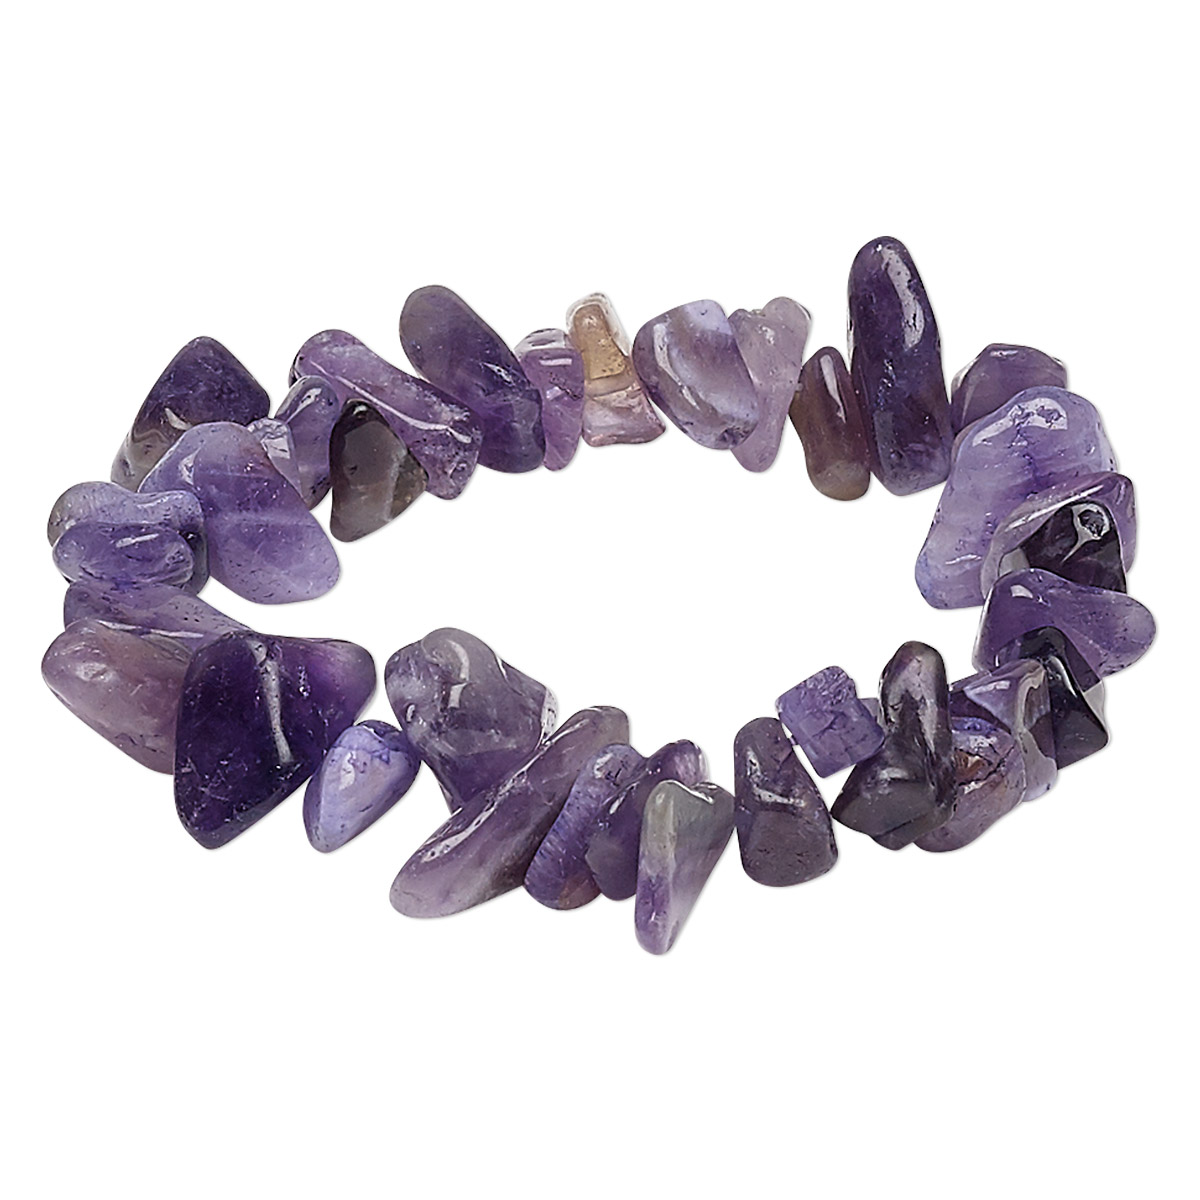 Bracelet, stretch, amethyst (natural), extra-large chip, 7-1/2 inches ...